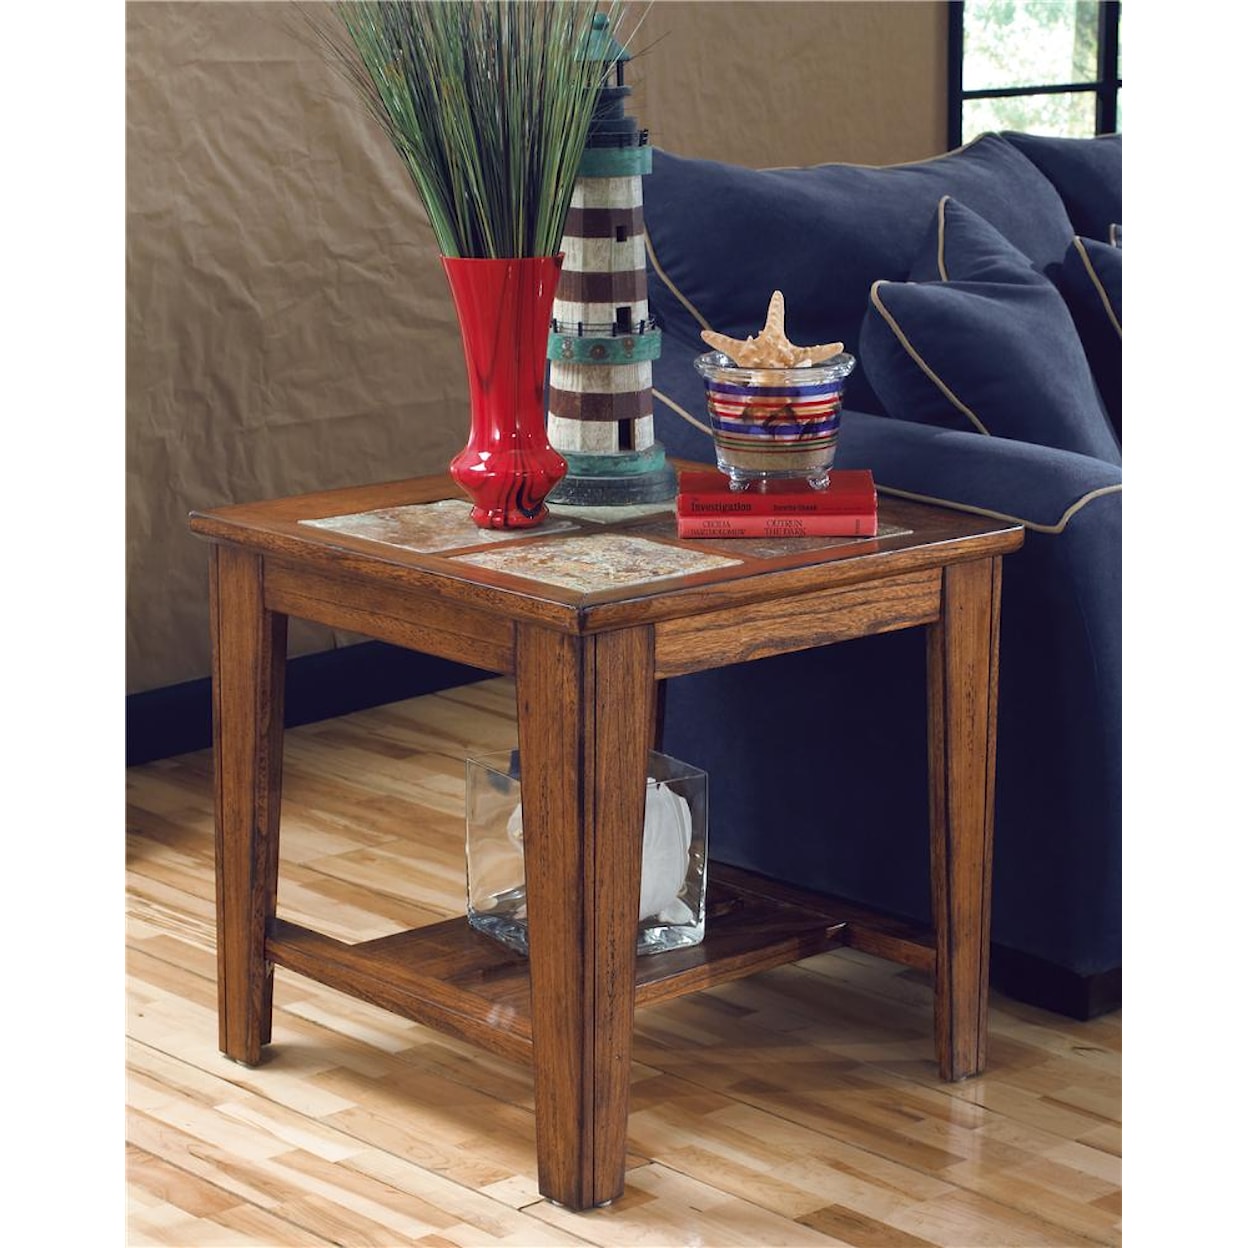 Signature Design by Ashley Furniture Toscana Square End Table